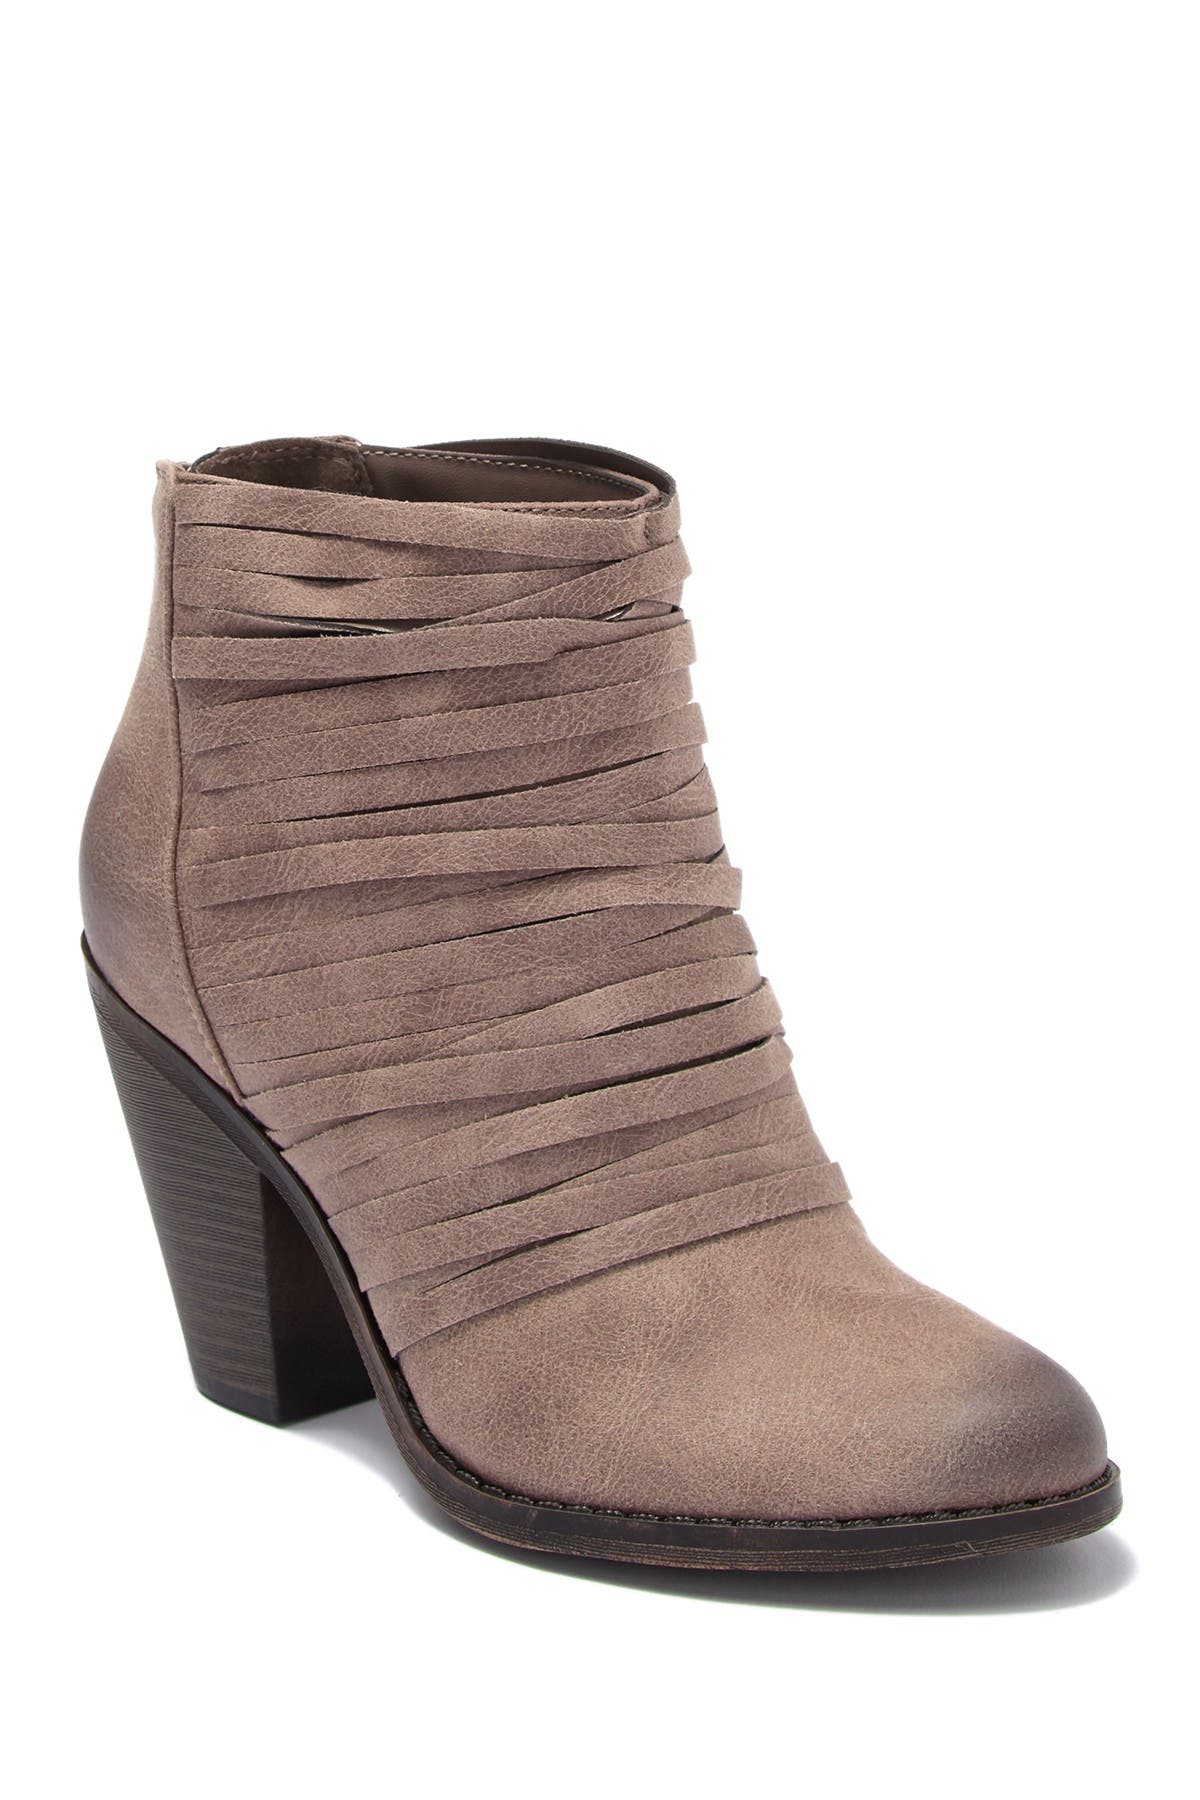 Fergalicious | Whippy Ankle Boot 